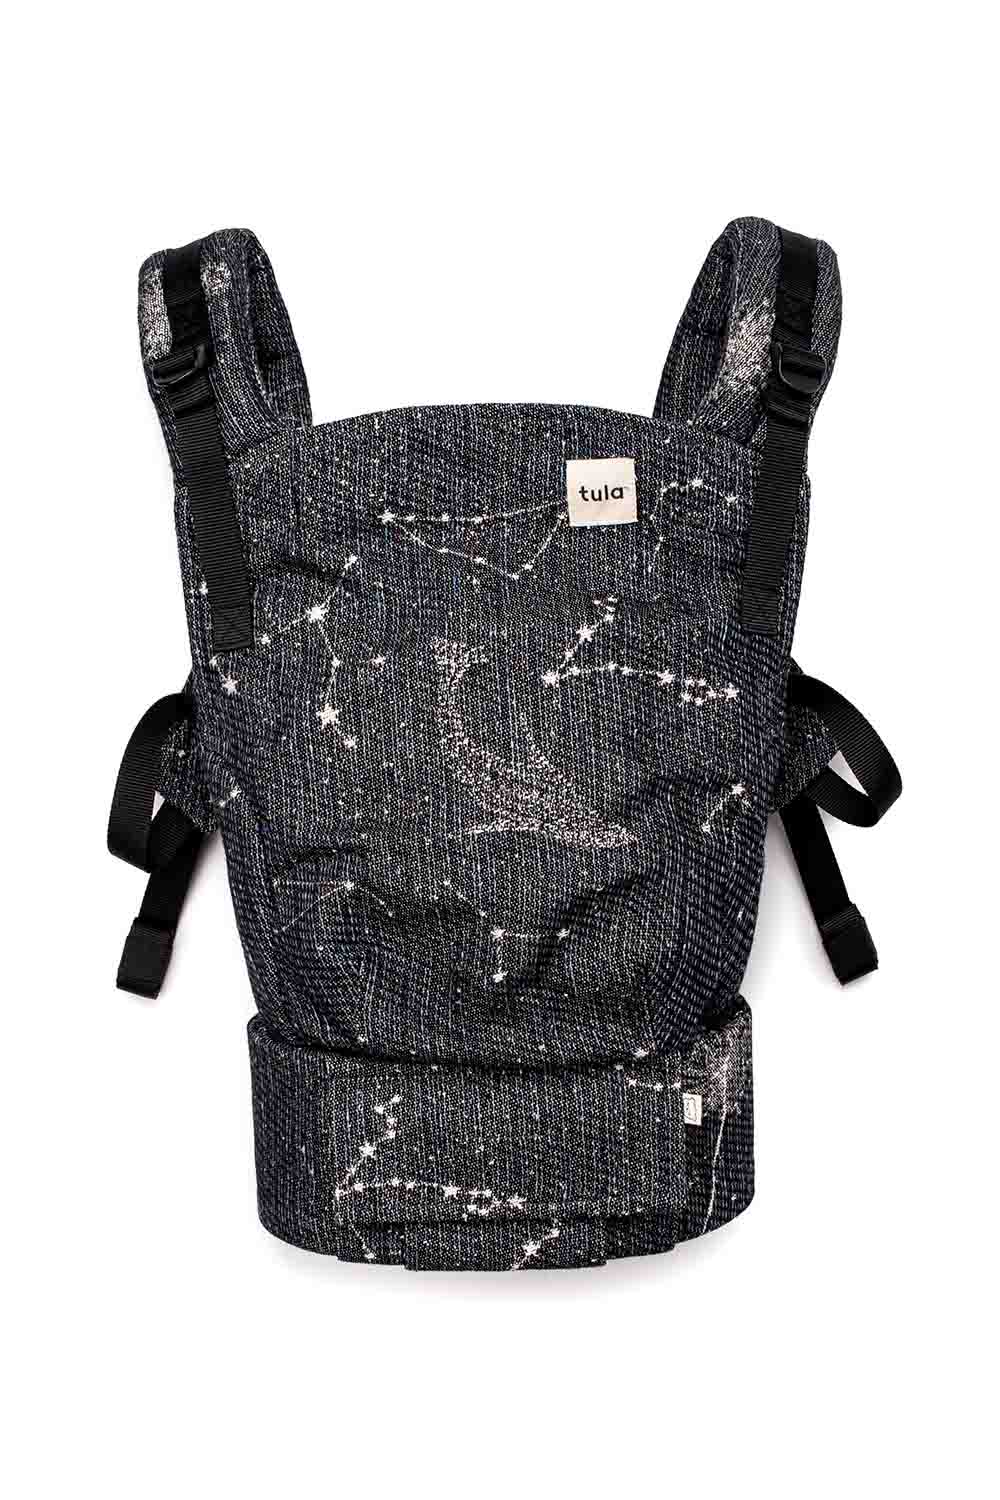 La Constellation - Signature Woven Free-to-Grow Baby Carrier